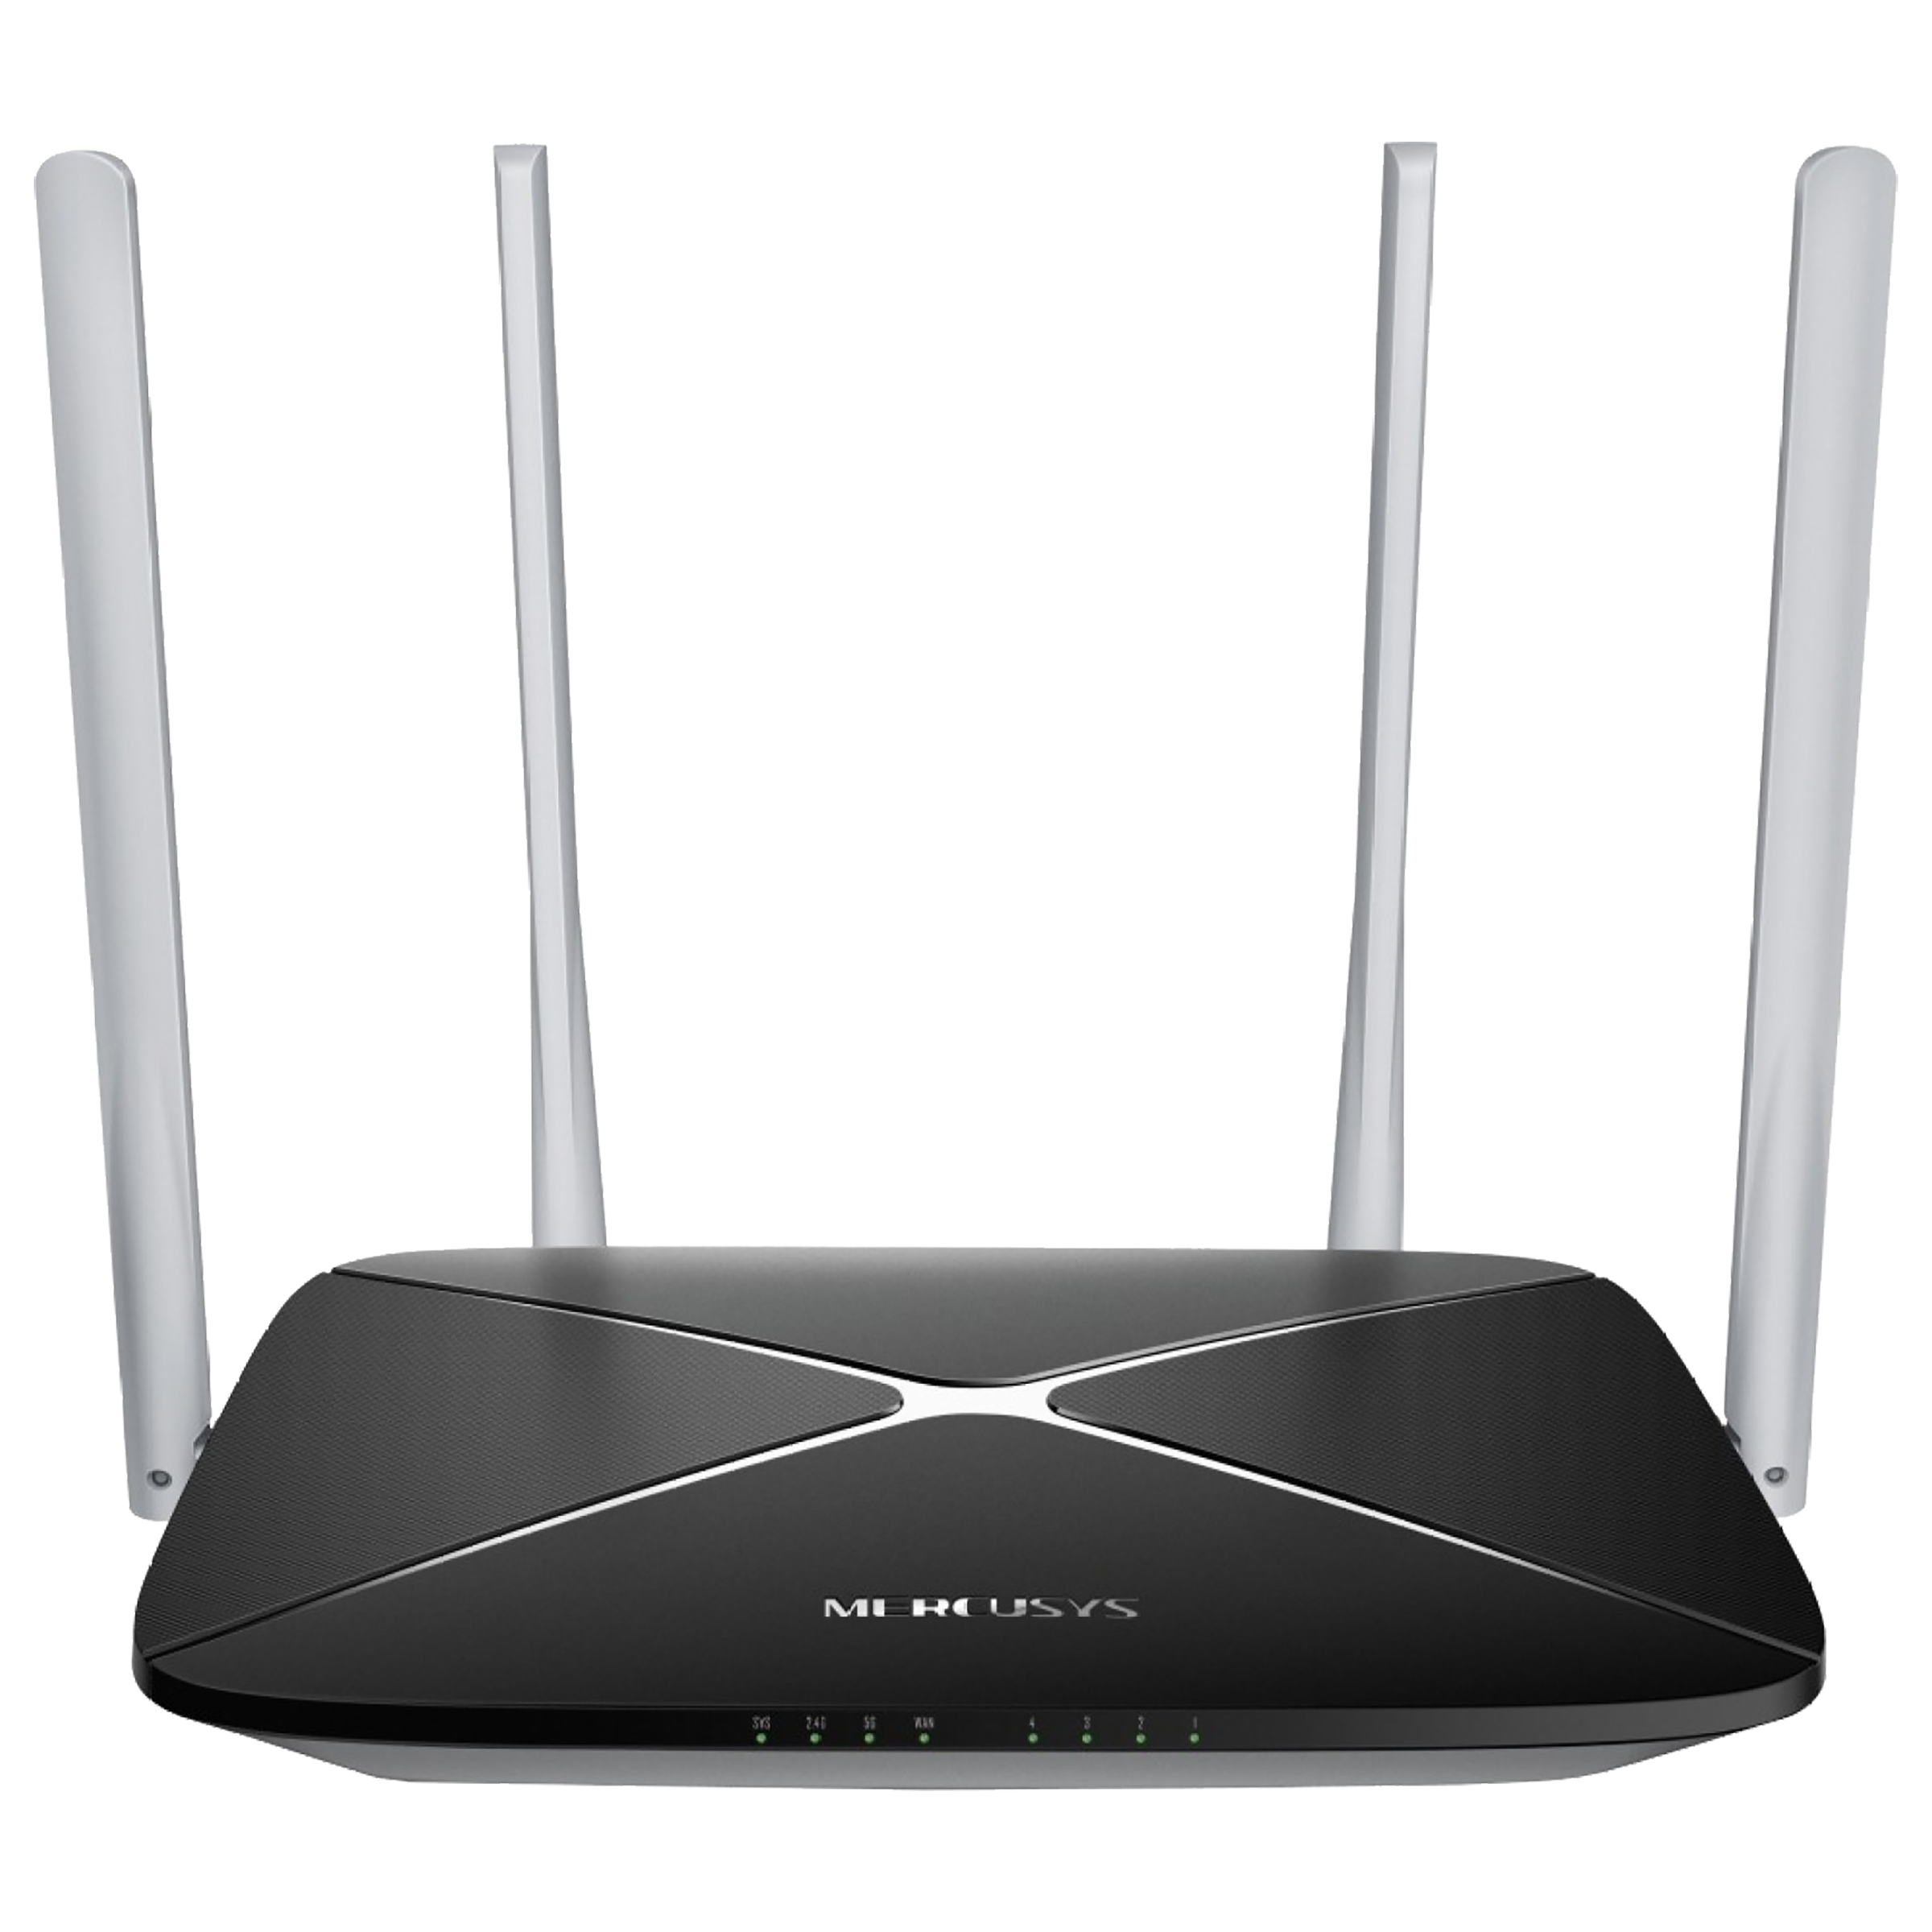 MERCUSYS AC Dual Band 1200 Mbps WiFi Router (4 Antennas, 5 LAN Ports, Concurrent Dual Band Connections, 12, Black)_1